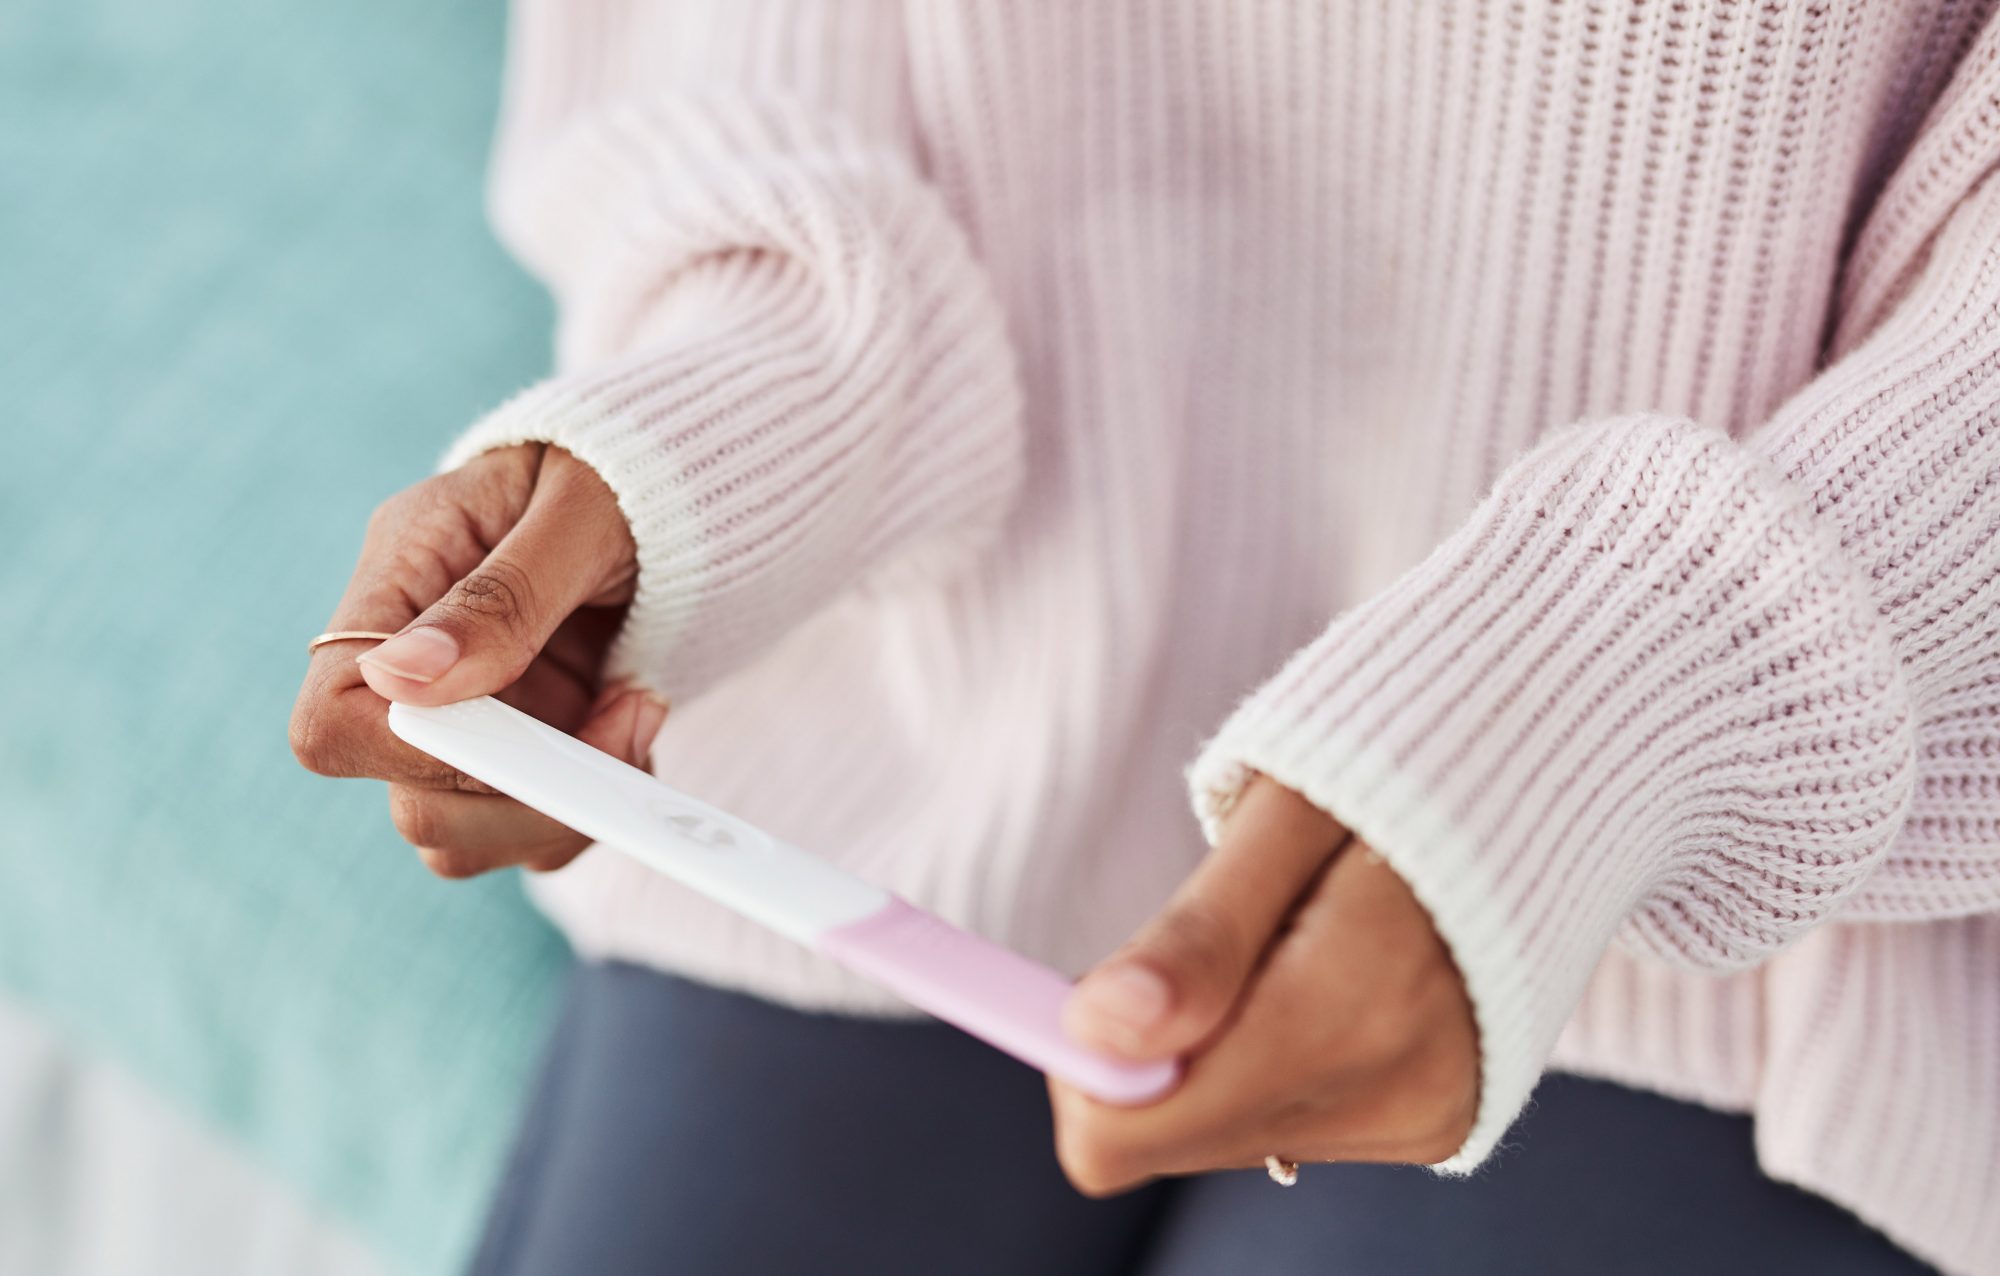 An image of a woman holding a pregnancy test.